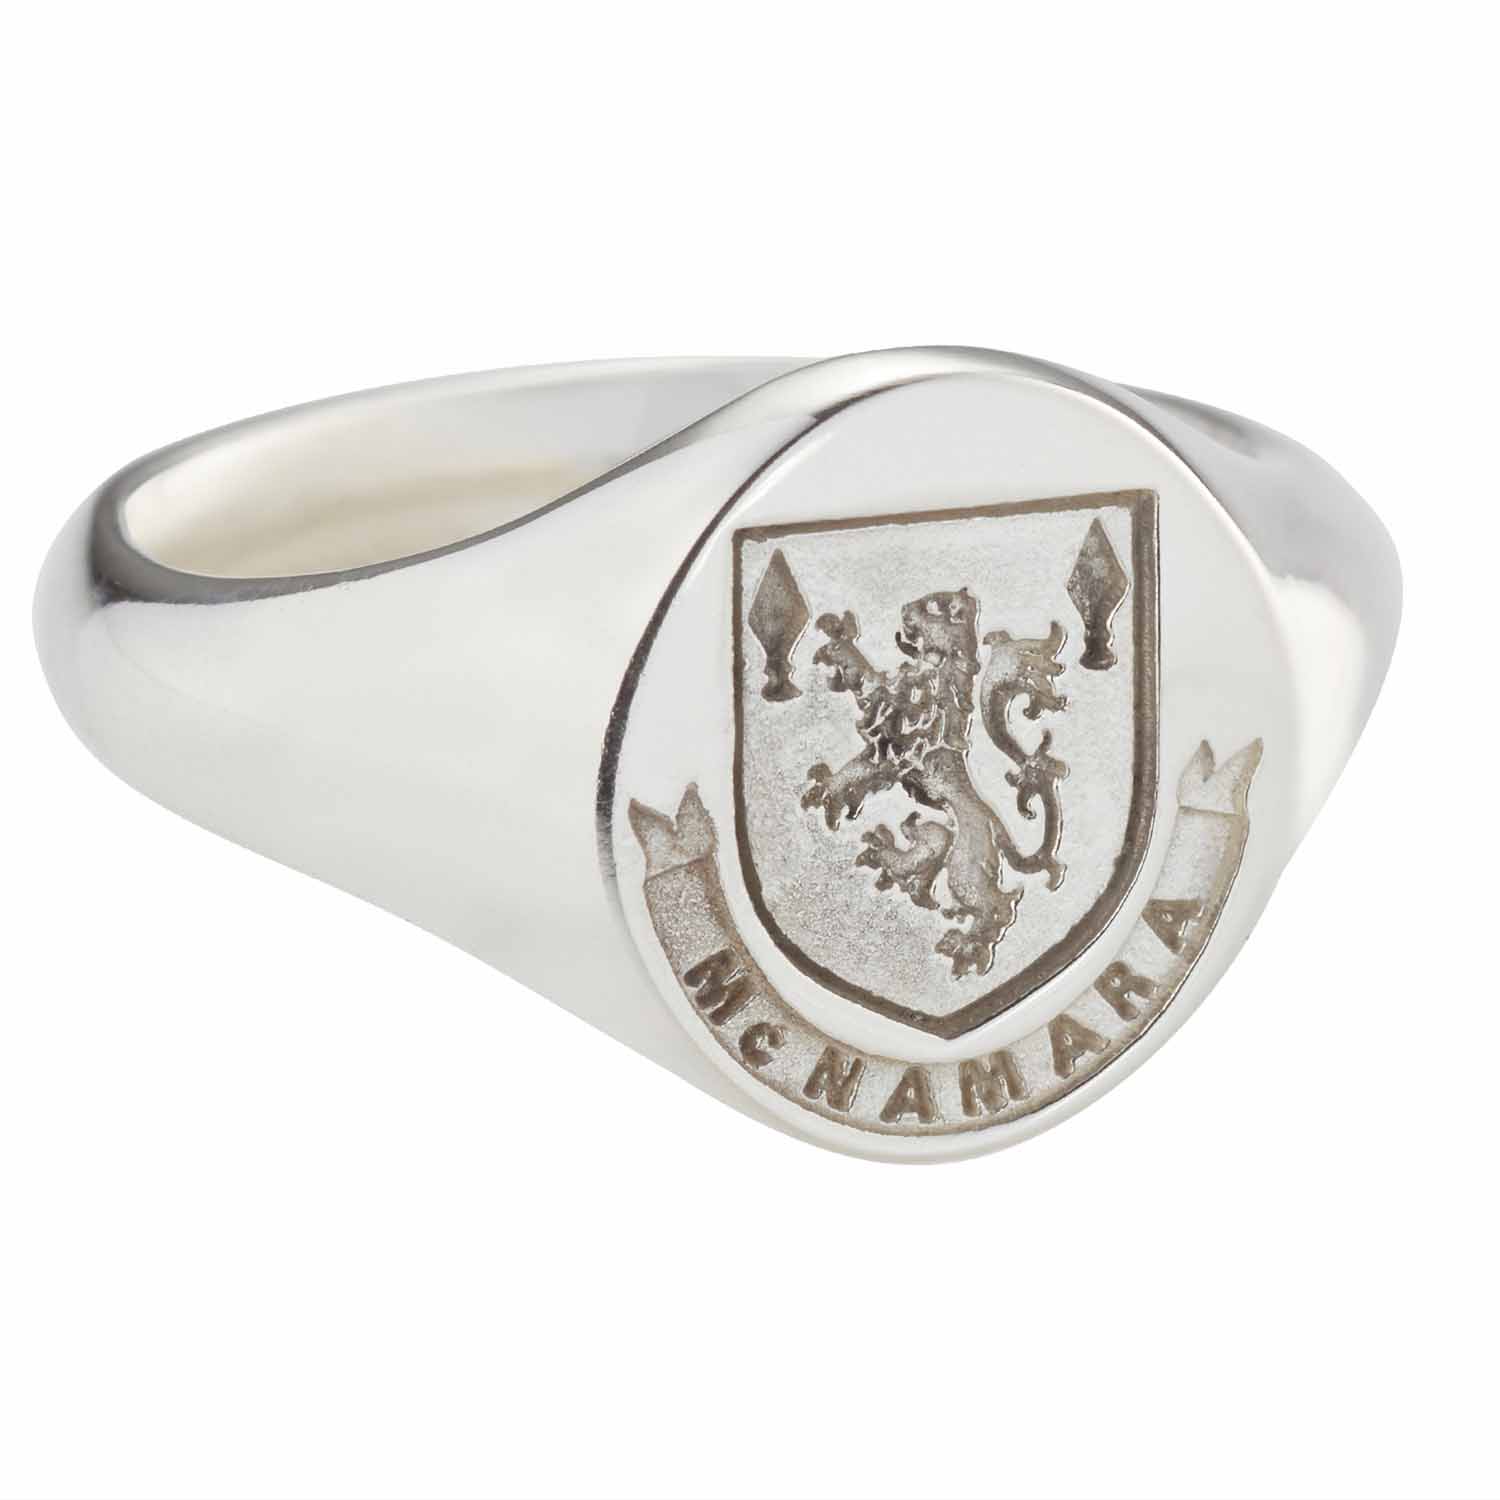 Product image for Irish Rings - Personalized Sterling Silver Coat of Arms Ring - Medium